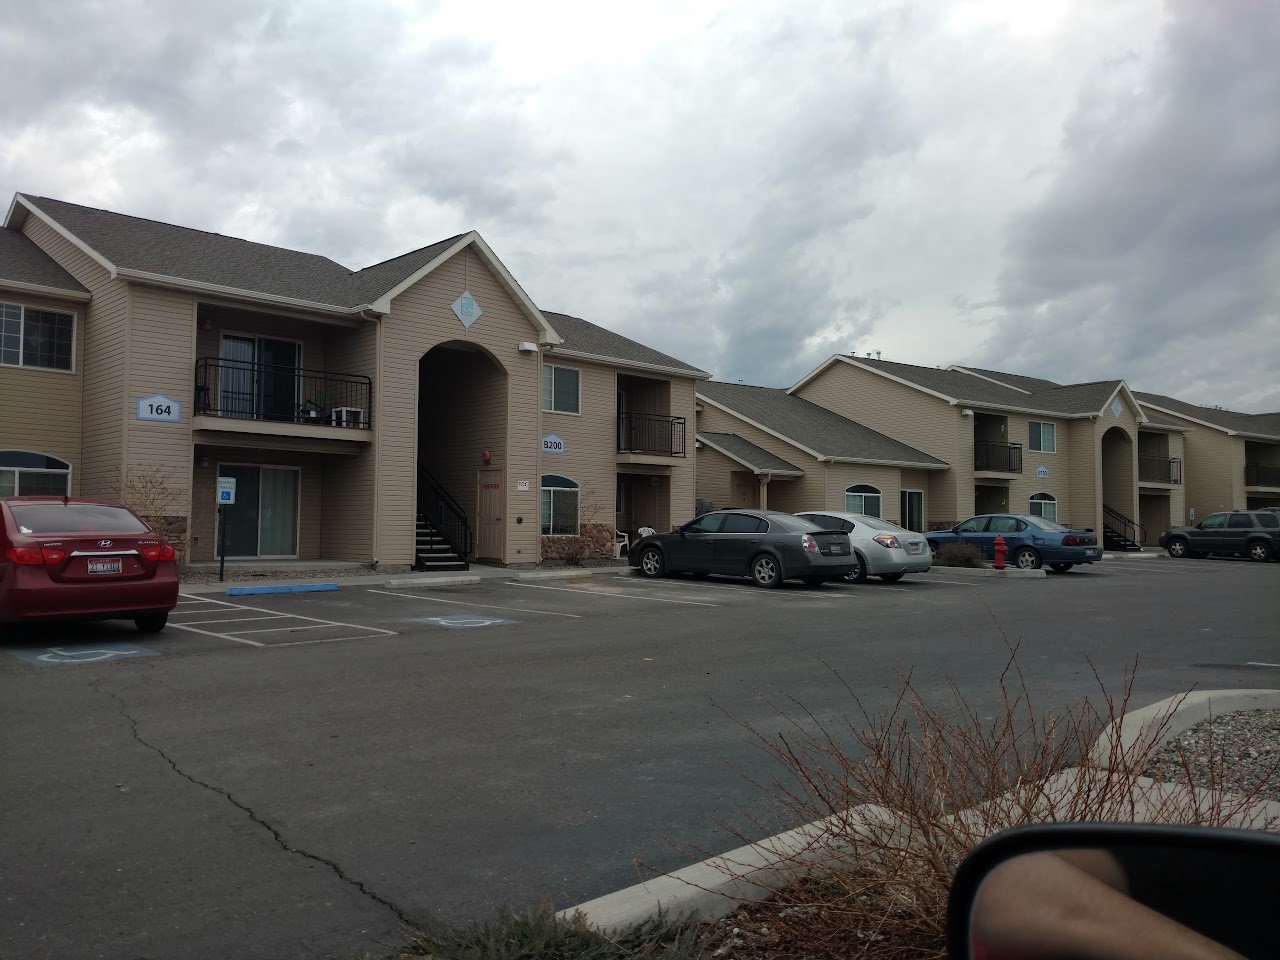 Photo of TIMBERLAKE VILLAGE. Affordable housing located at 176 MEADOWVIEW LANE TWIN FALLS, ID 83301